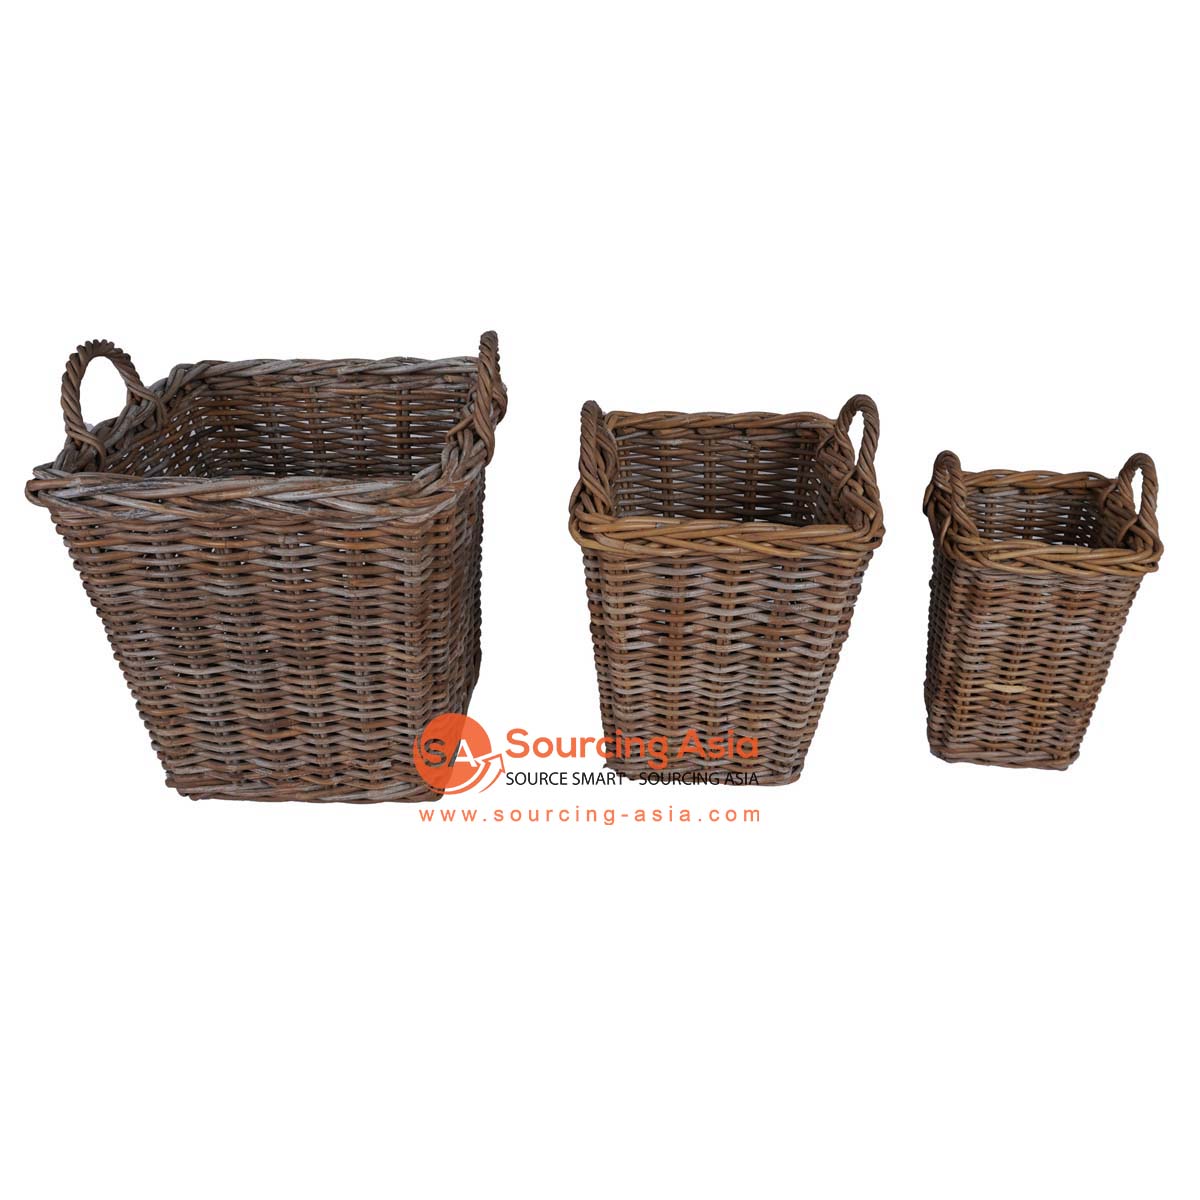 HBSC297 SET OF THREE NATURAL RATTAN SQUARE BASKETS WITH HANDLE